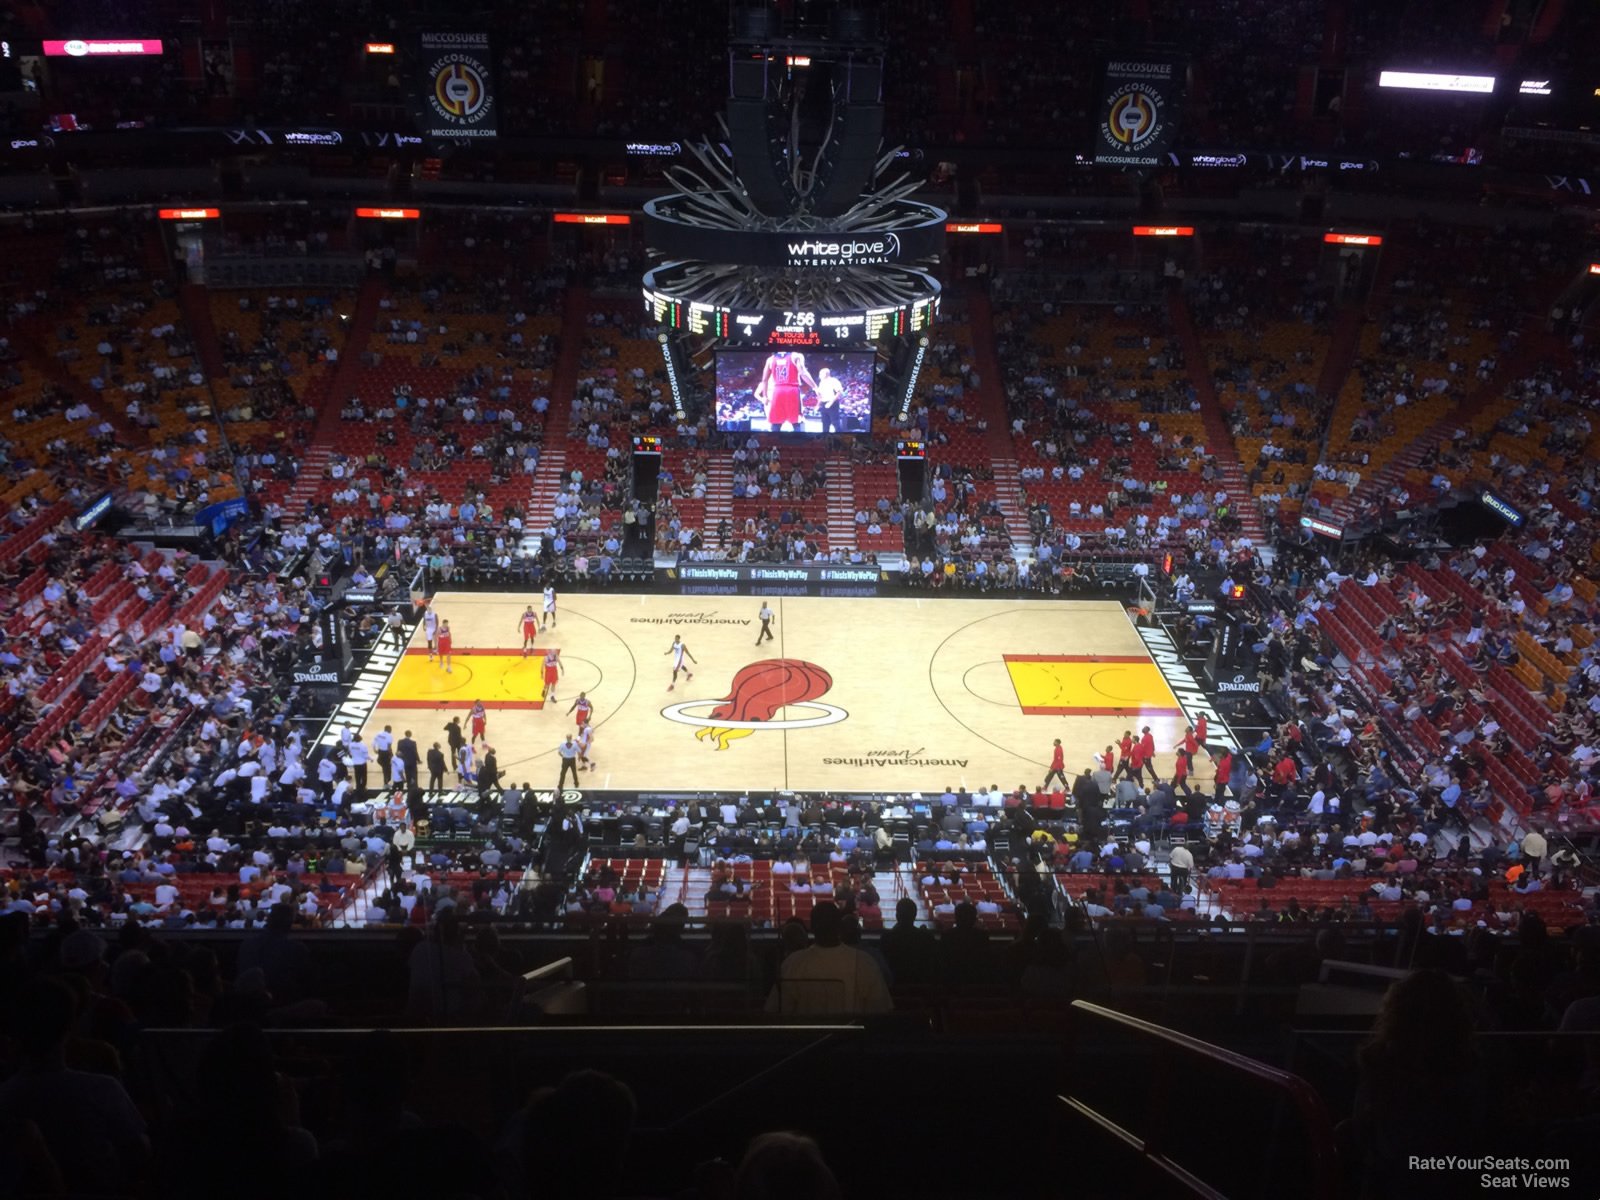 section 309, row 14 seat view  for basketball - ftx arena